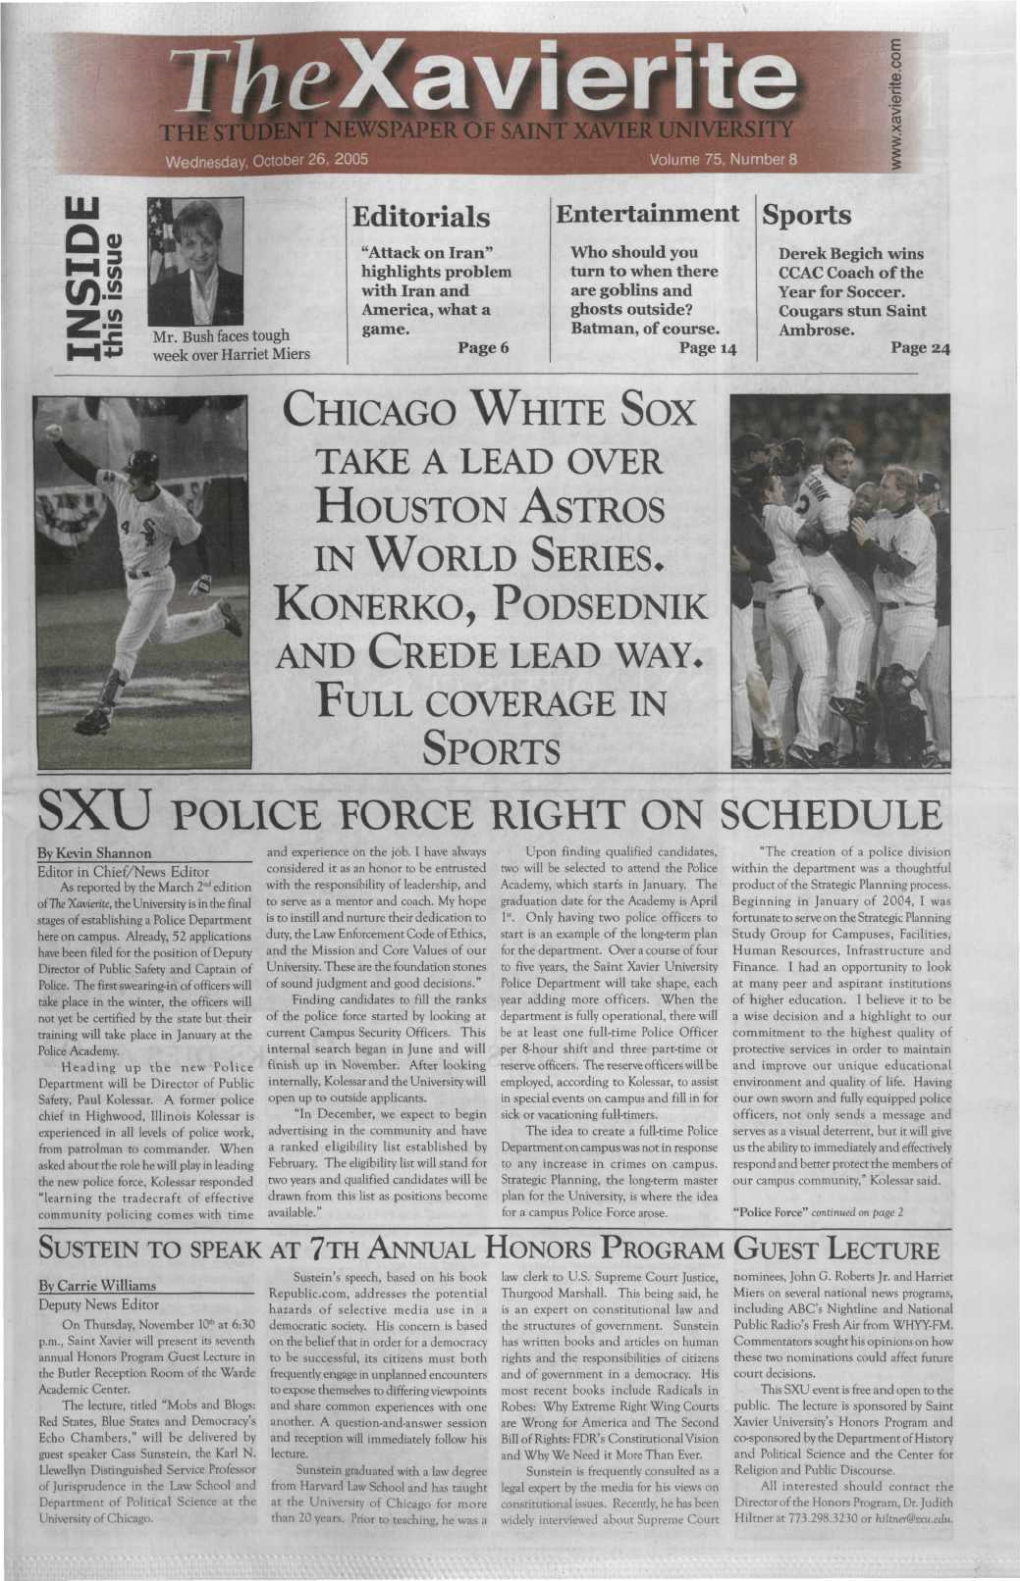 SXU POLICE FORCE RIGHT on SCHEDULE by Kevin Shannon and Experience on the Job